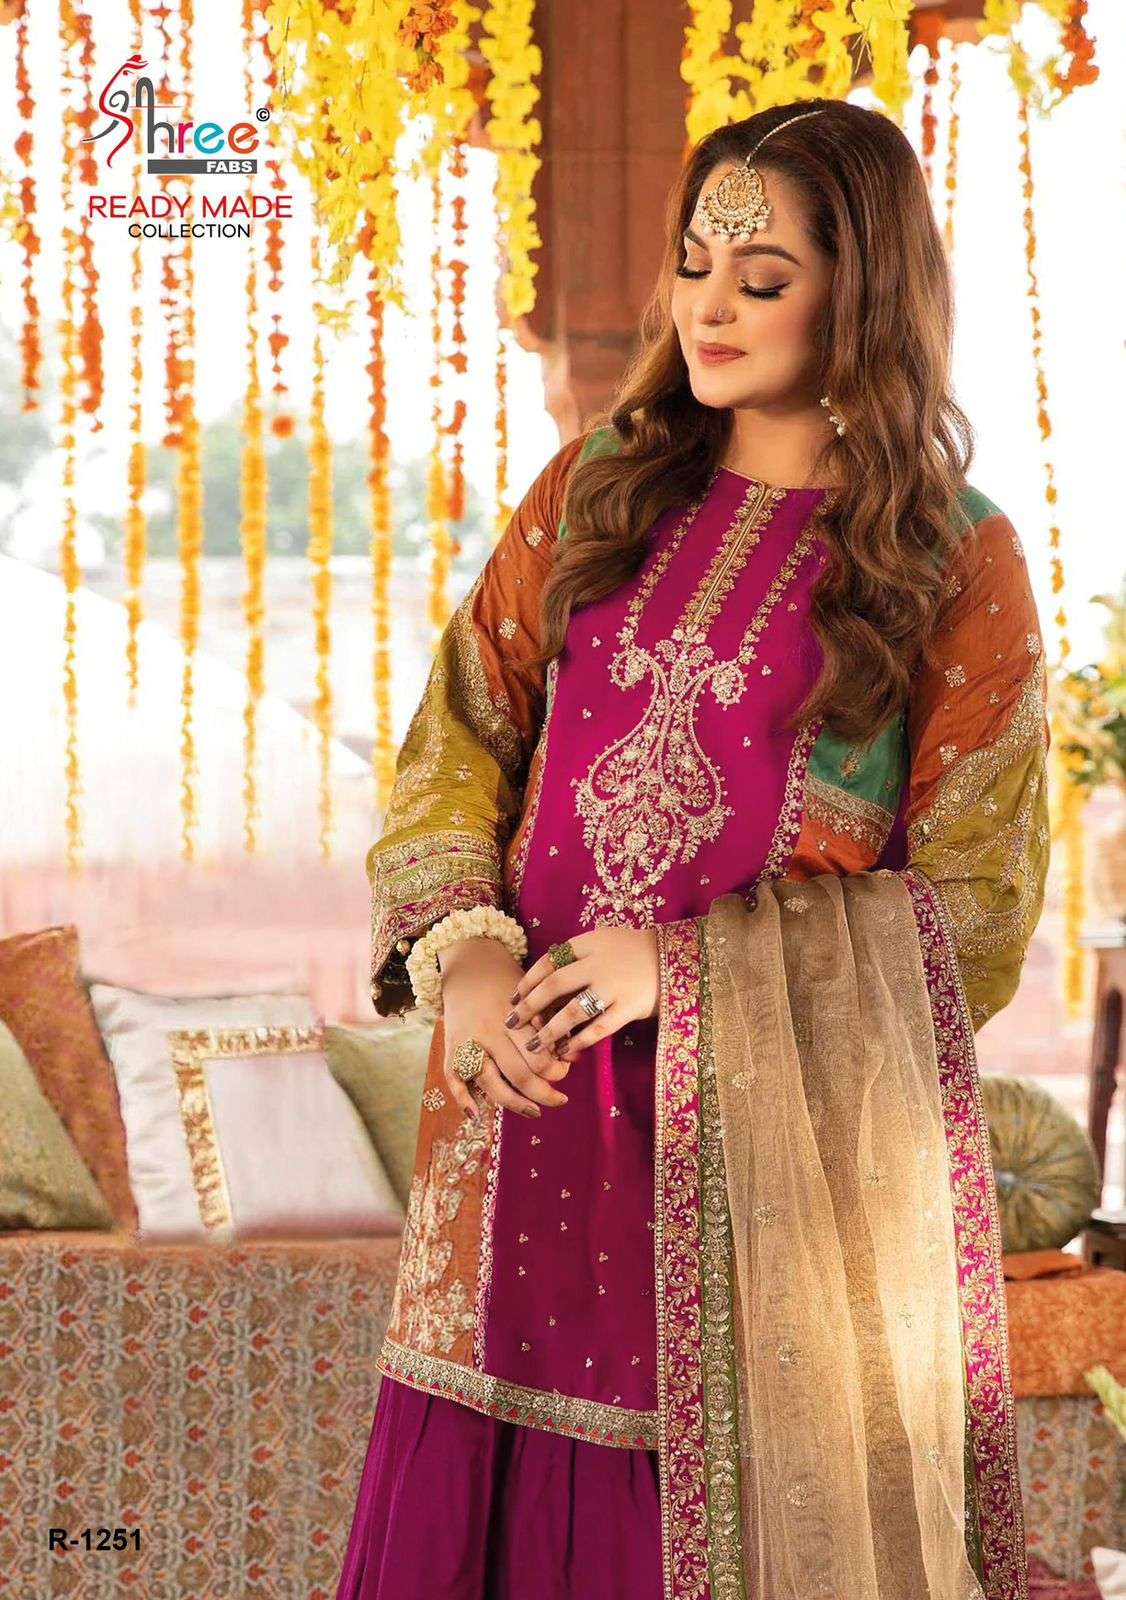 SHREE FABS 1251 FUNCTION SPECIAL READYMADE PAKISTANI SUITS S...